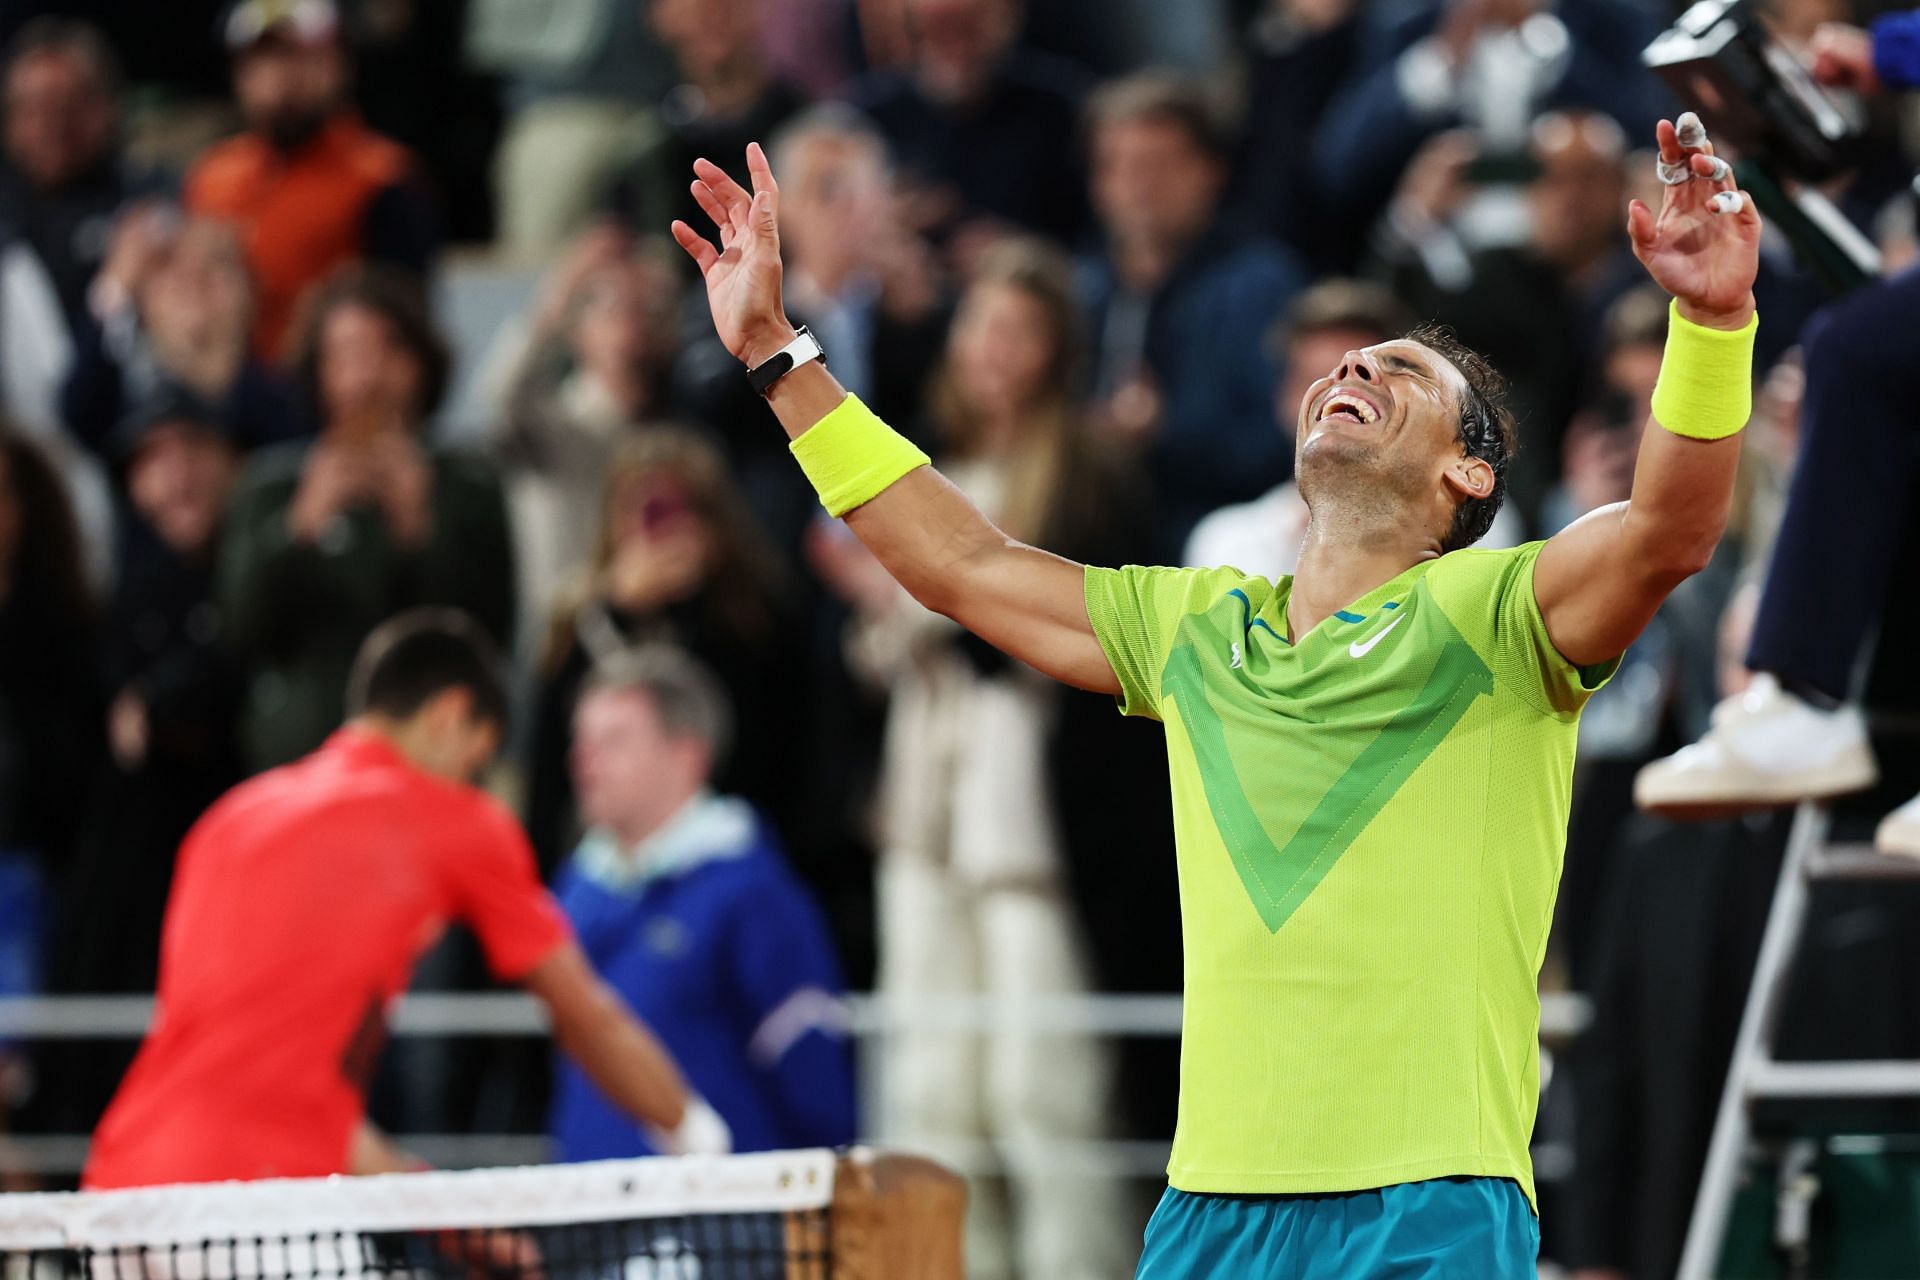 Beating defending champion Novak Djokovic at the French Open is the cherry on top of Nadal's title run.